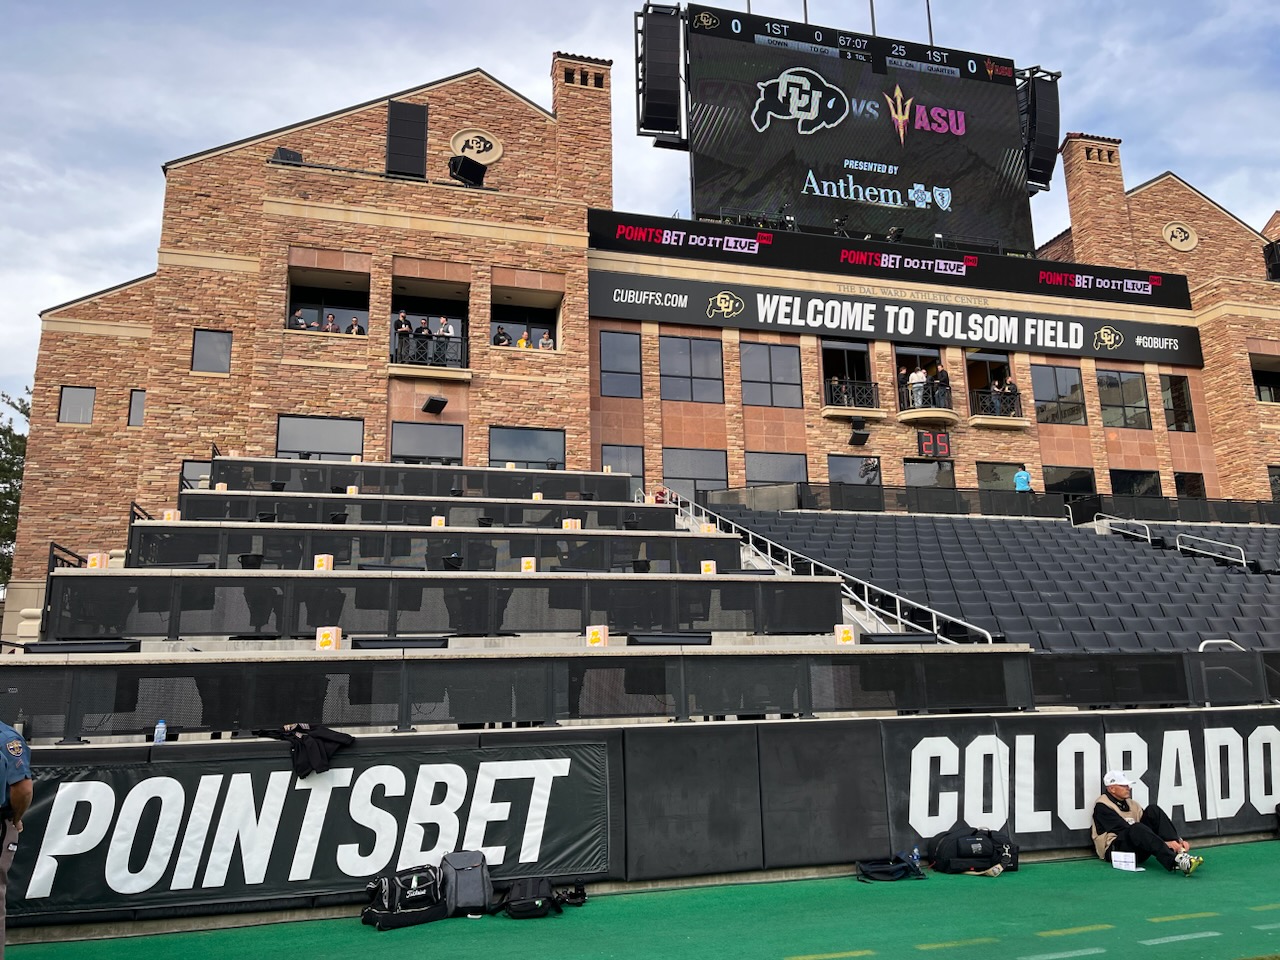 PointsBet ads get prominent display during the Colorado Buffaloes' homecoming game in October 2022 at Folsom Field in Boulder, Colorado. (Shane Connuck)